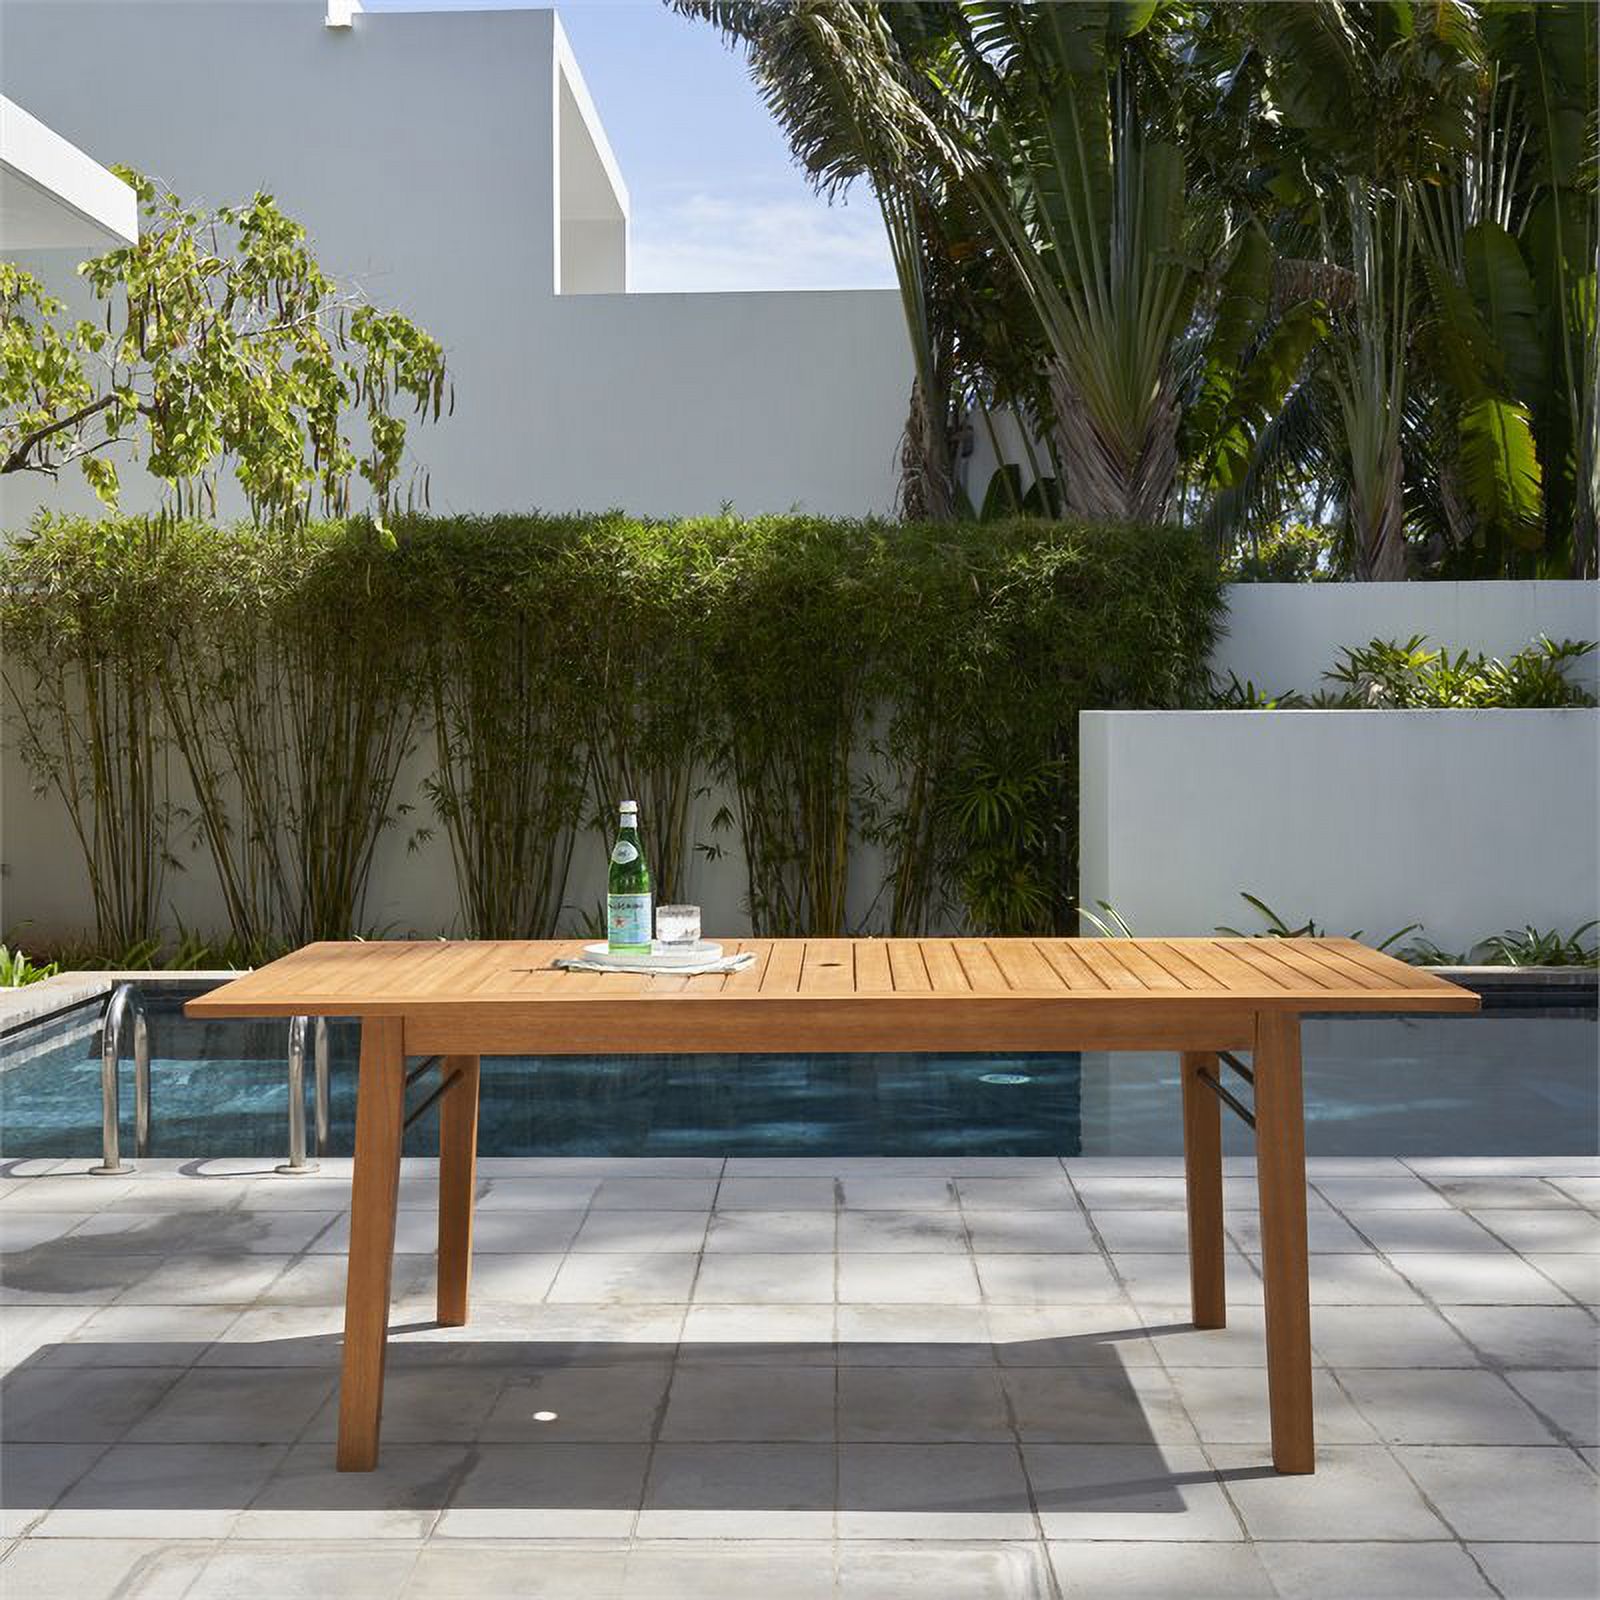 Gloucester Outdoor Patio Wood Dining Table - image 2 of 4